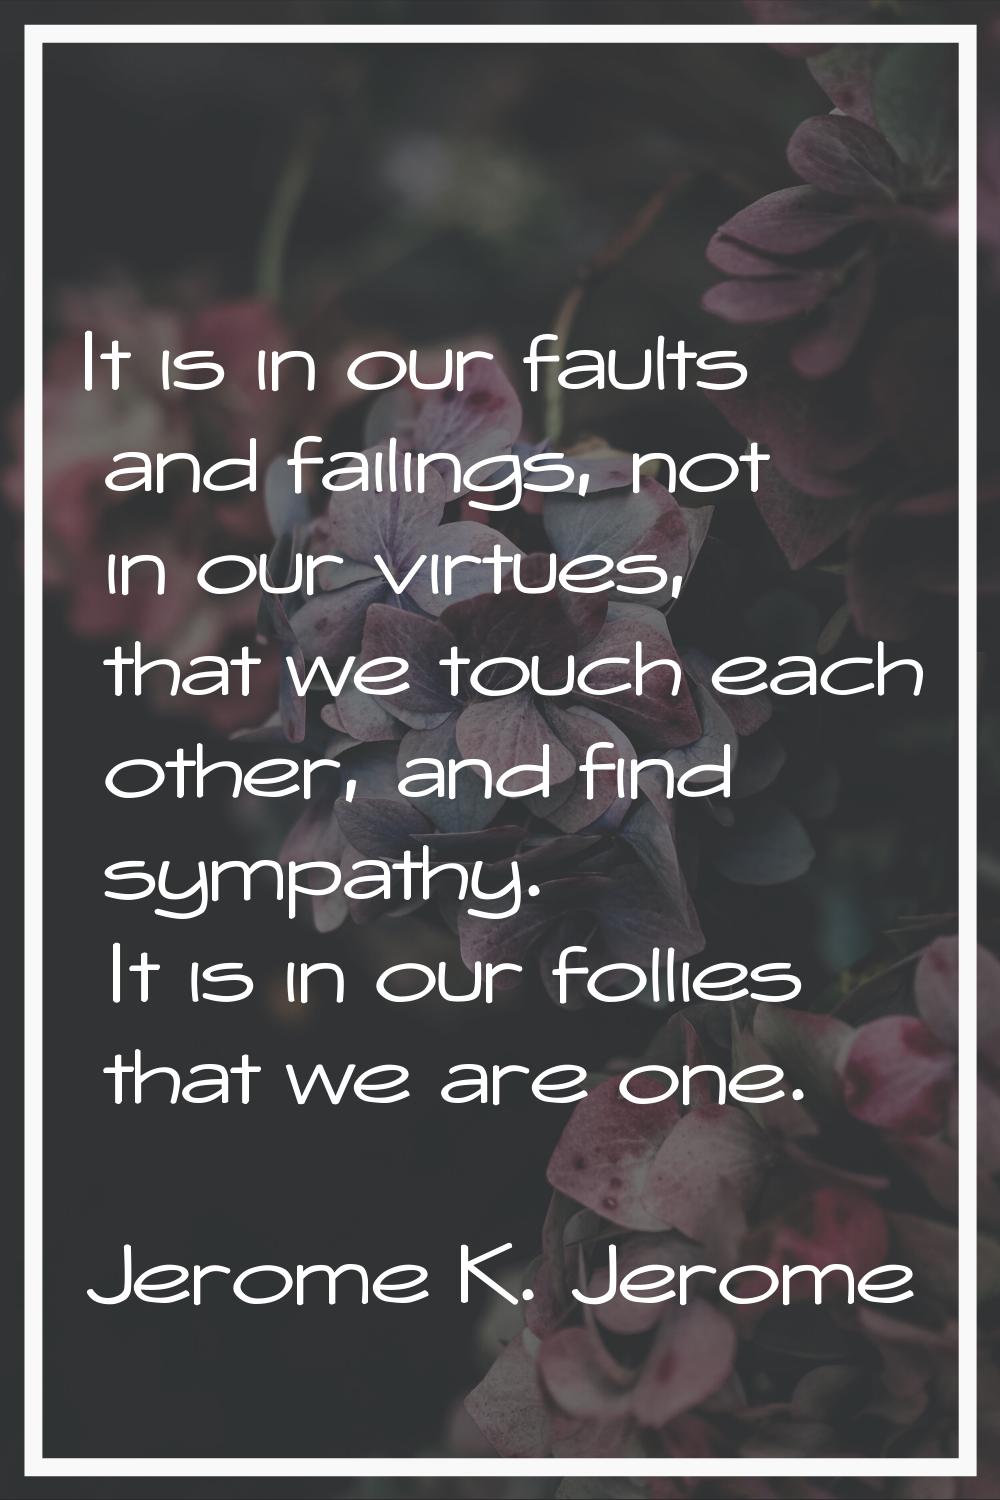 It is in our faults and failings, not in our virtues, that we touch each other, and find sympathy. 